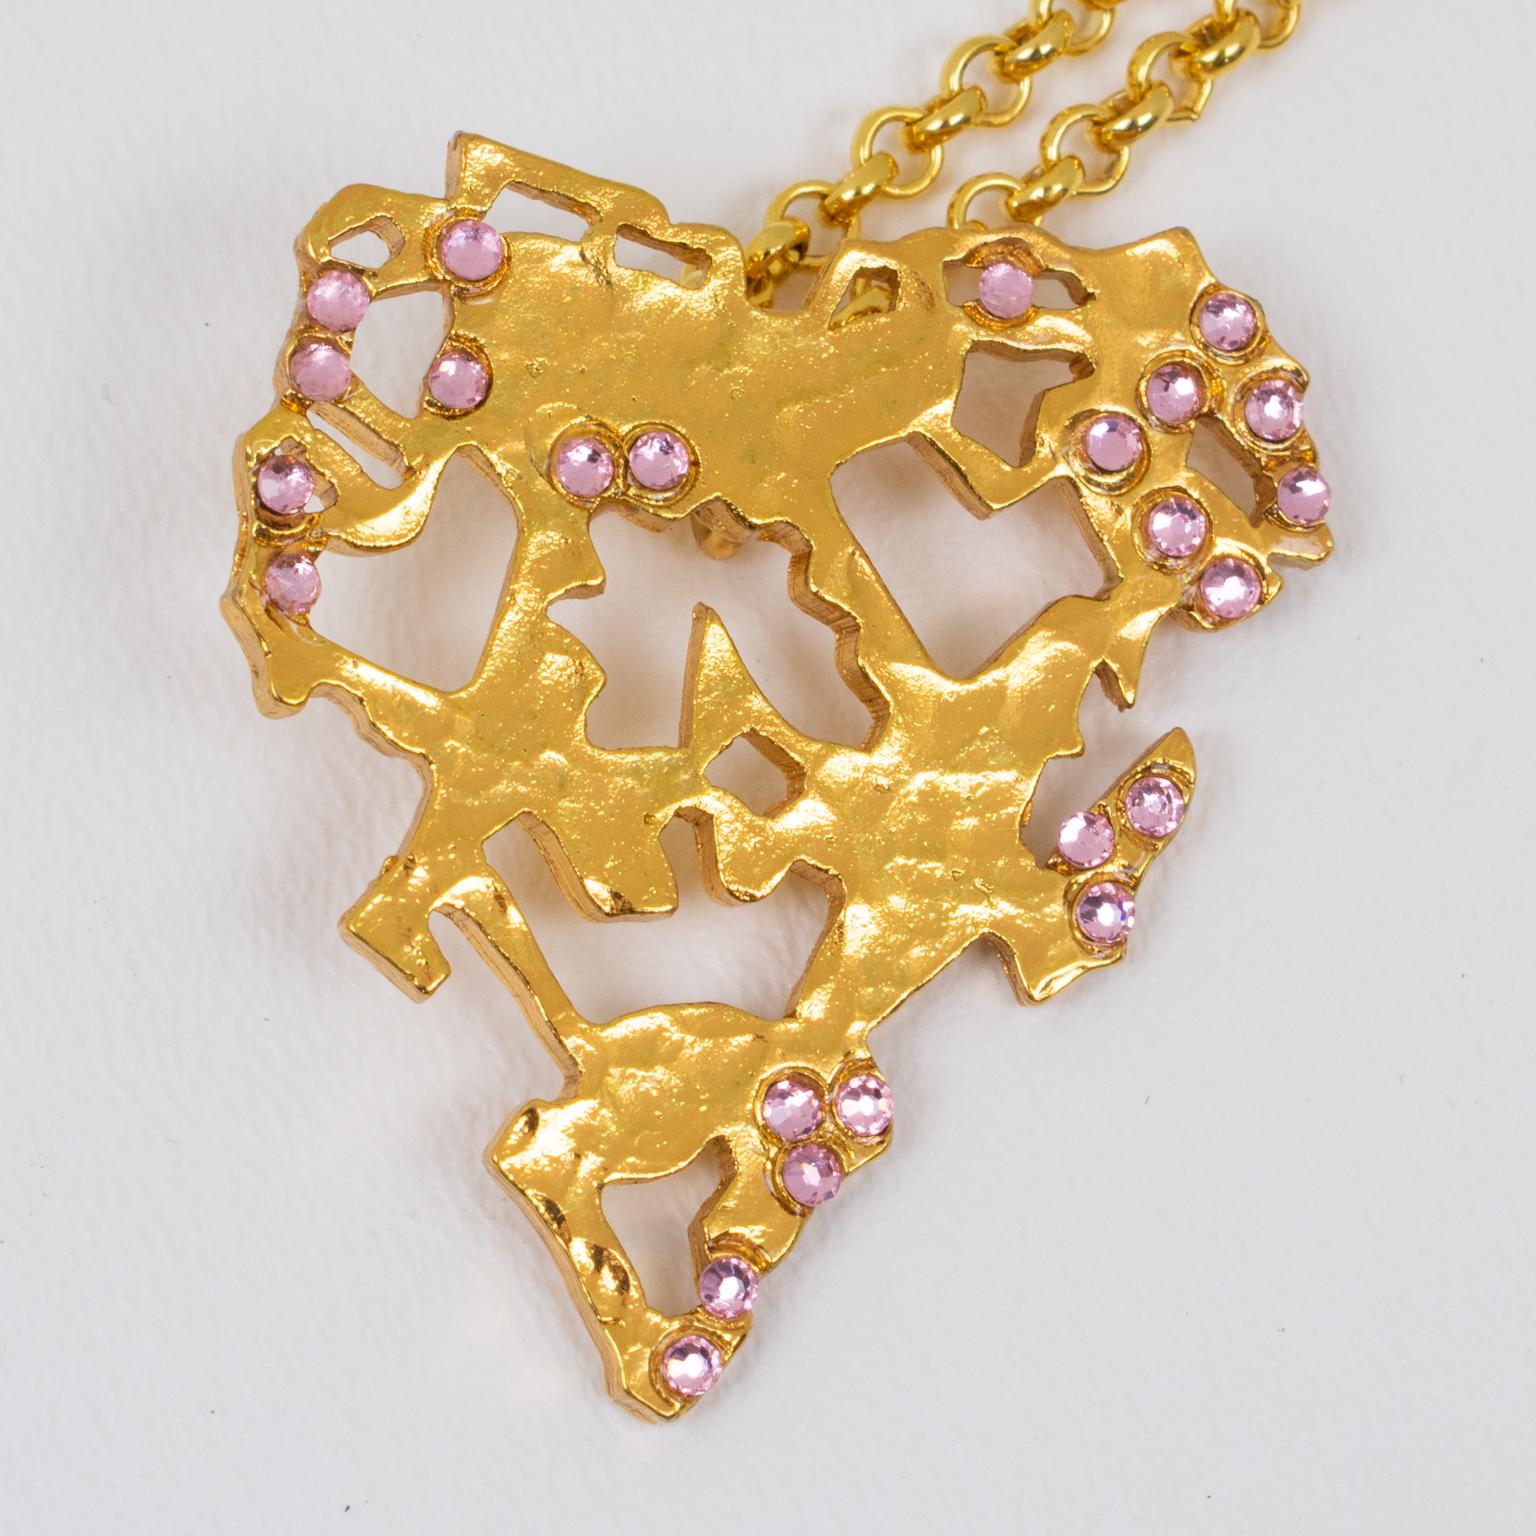 Christian Lacroix Gilt Metal and Pink Jeweled Brutalist Heart Pendant Necklace For Sale 3